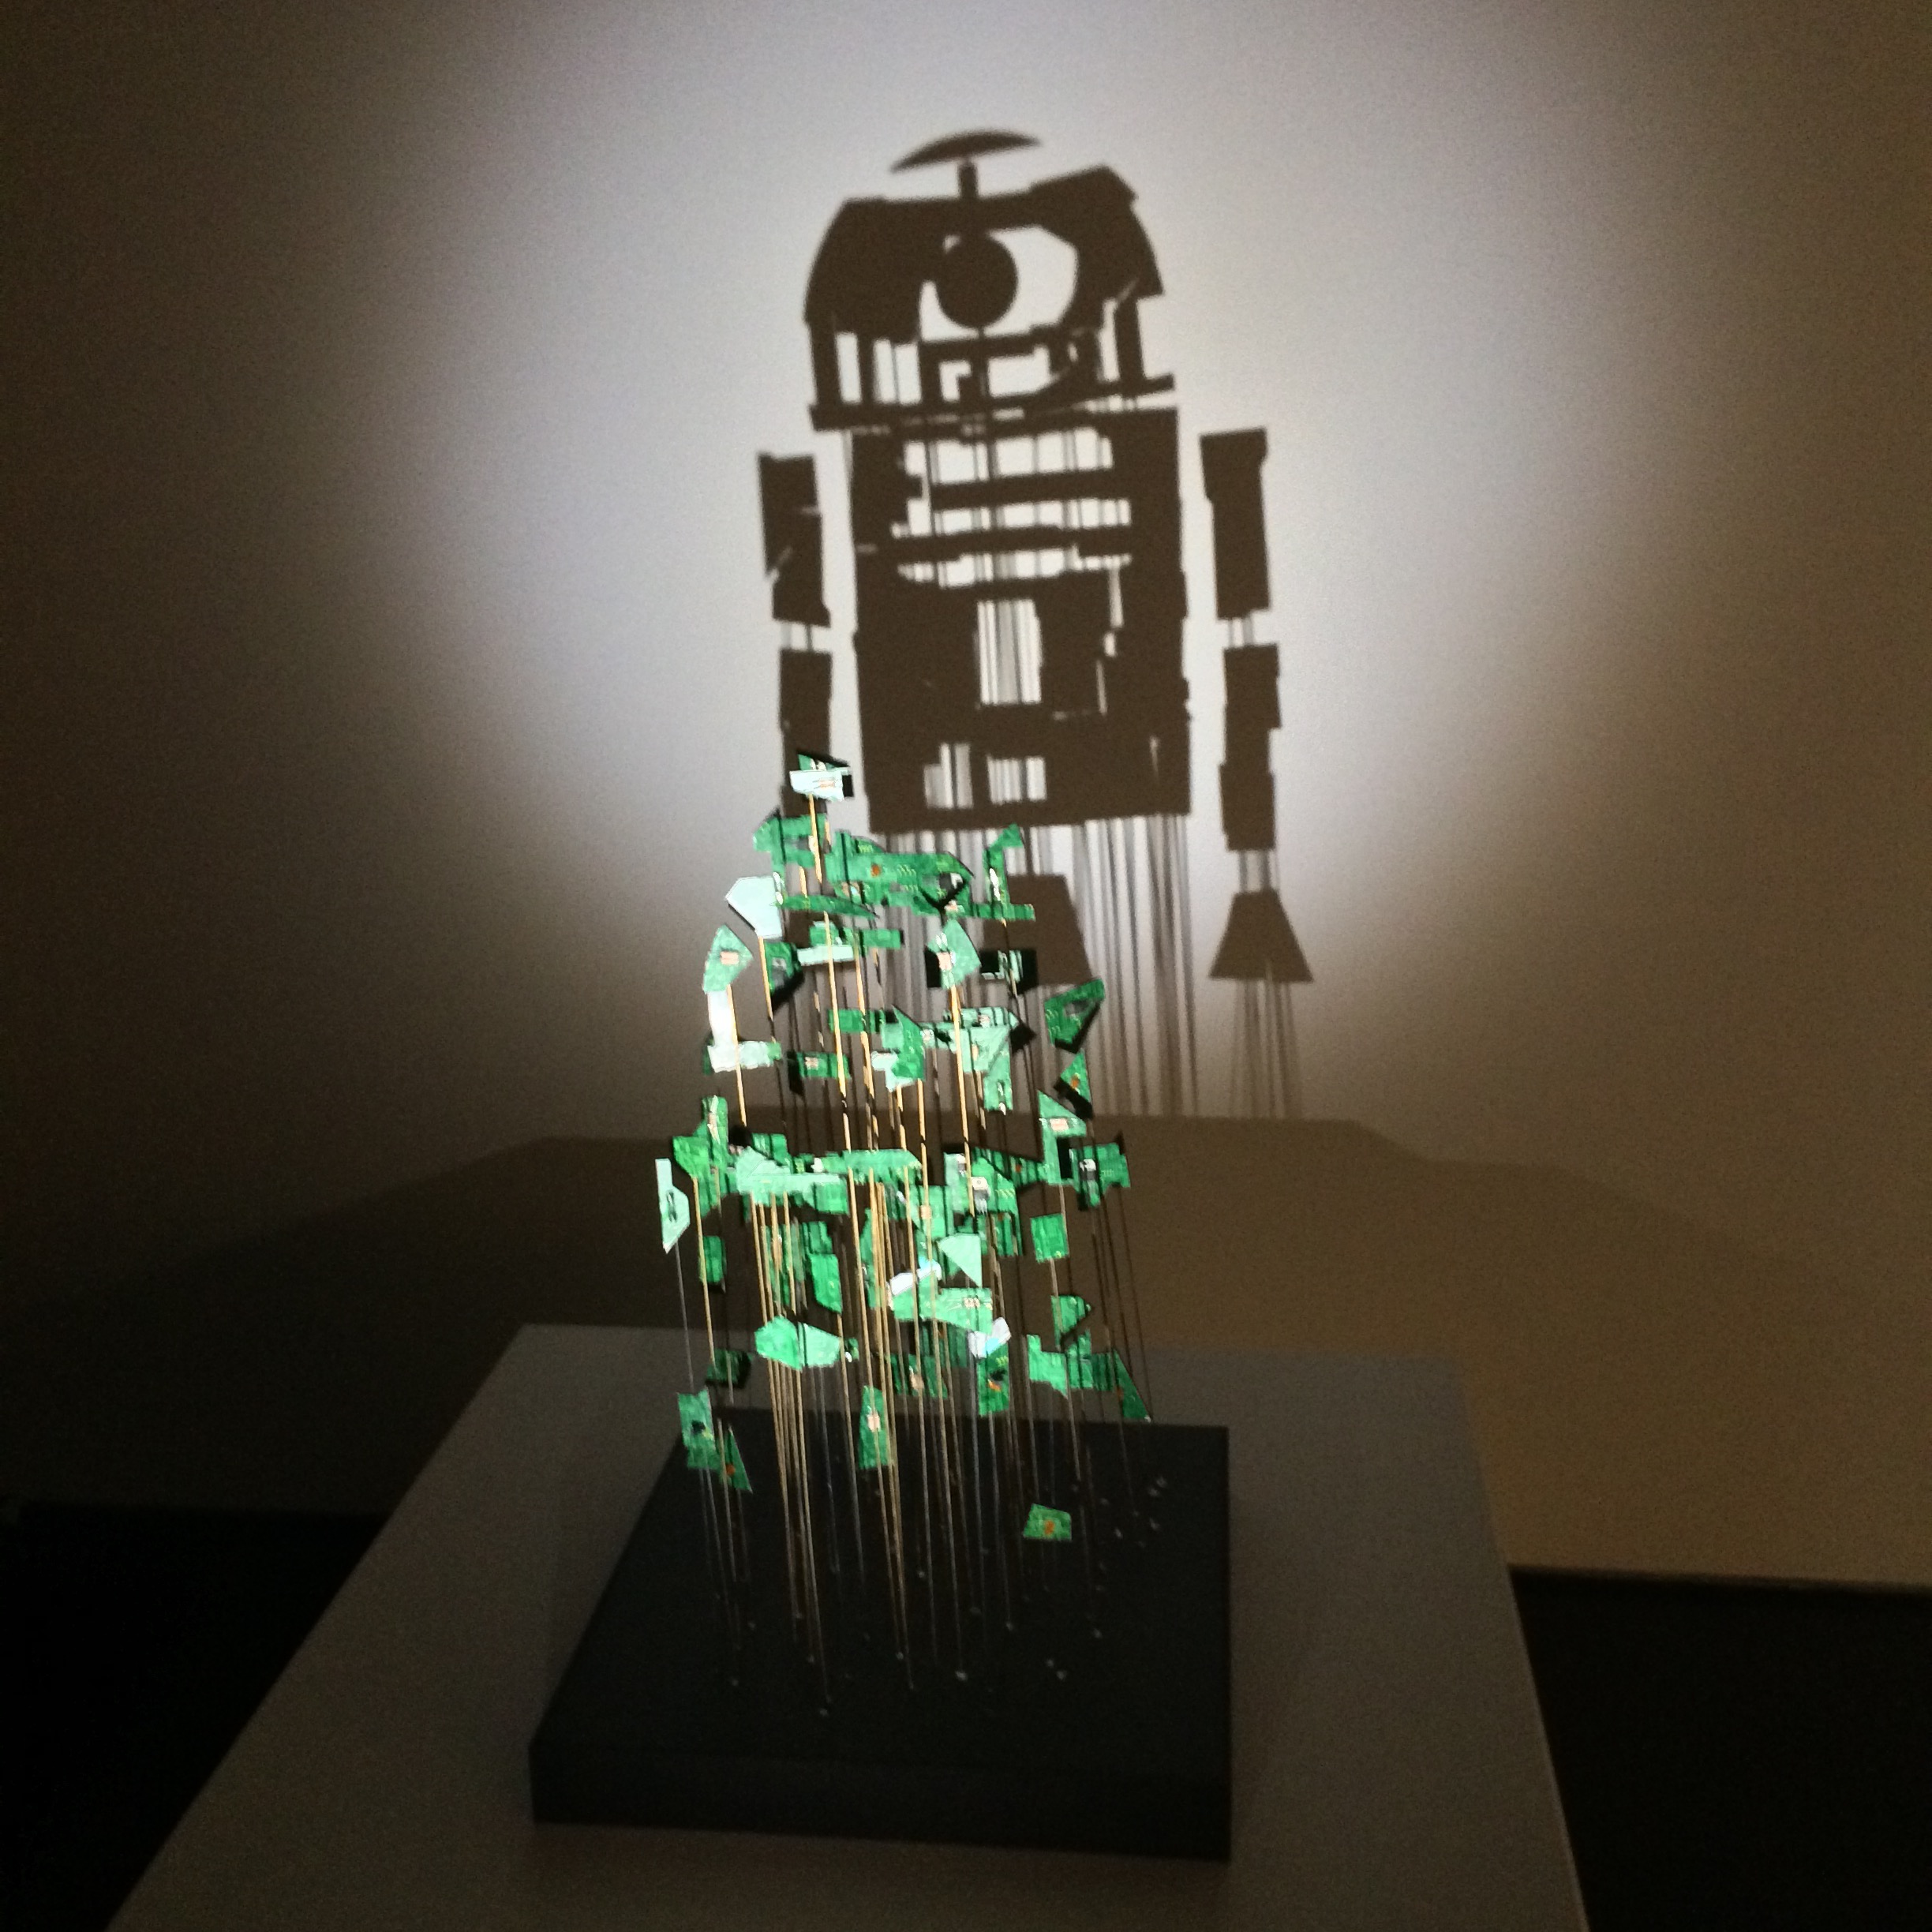 One Man’s Trash Is Another Man’s Fantastic Star Wars Art Exhibit